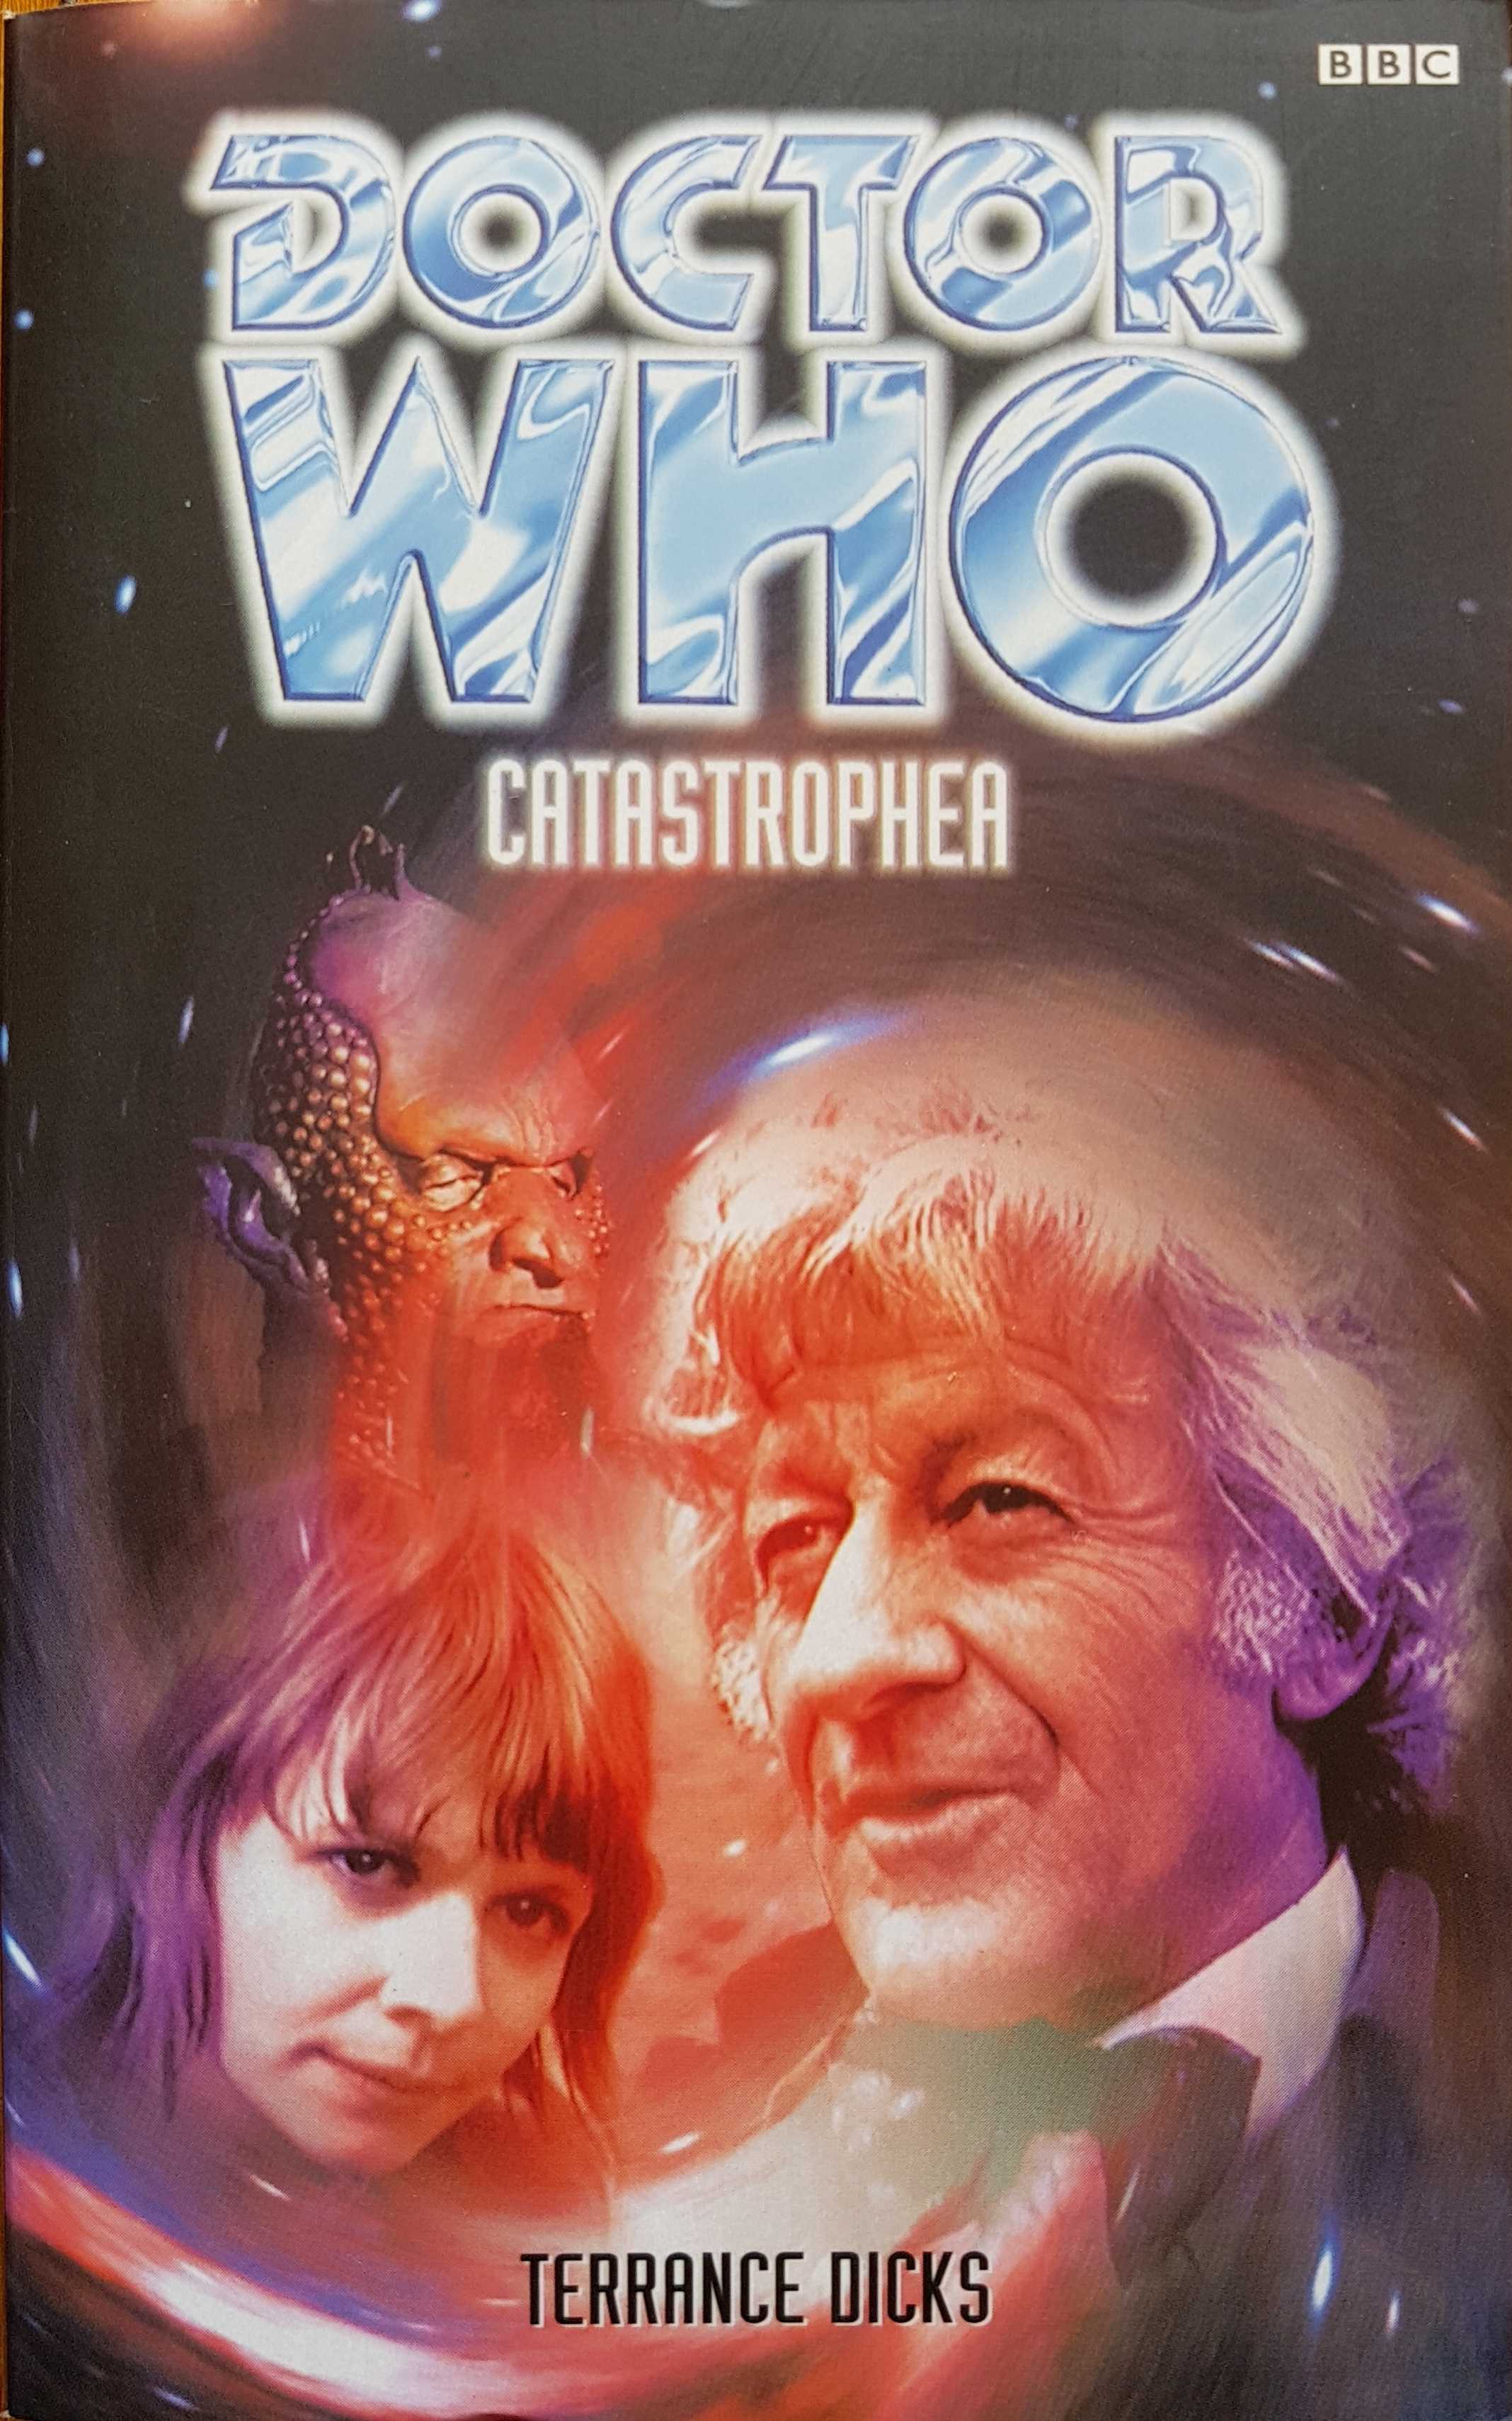 Picture of 0-563-40584-8 Doctor Who - Catastropher (Autographed) book by artist Terrance Dicks from the BBC records and Tapes library